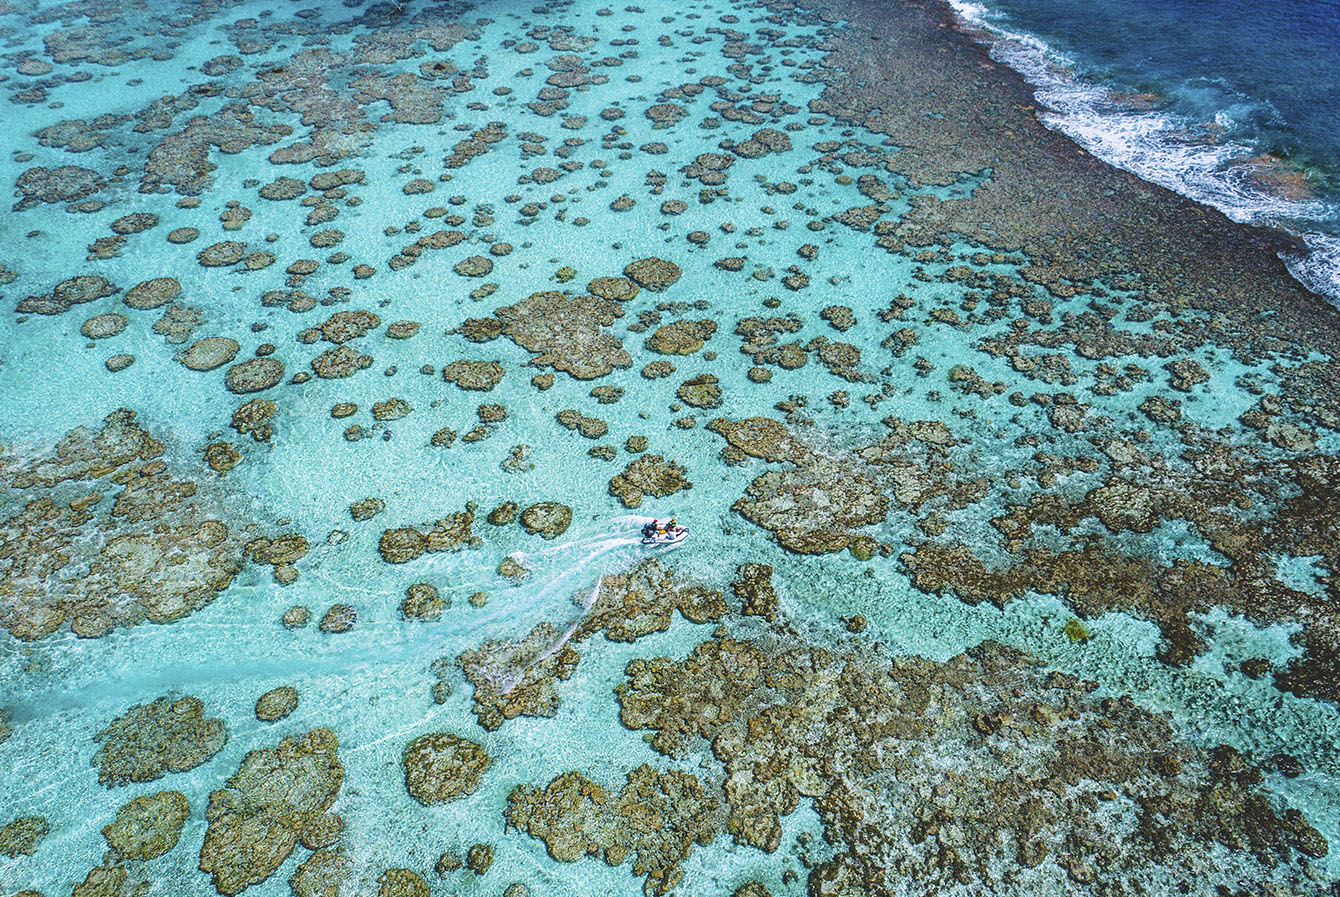 Ocean with shallow coral reefs in Tahiti island in French Polynesia